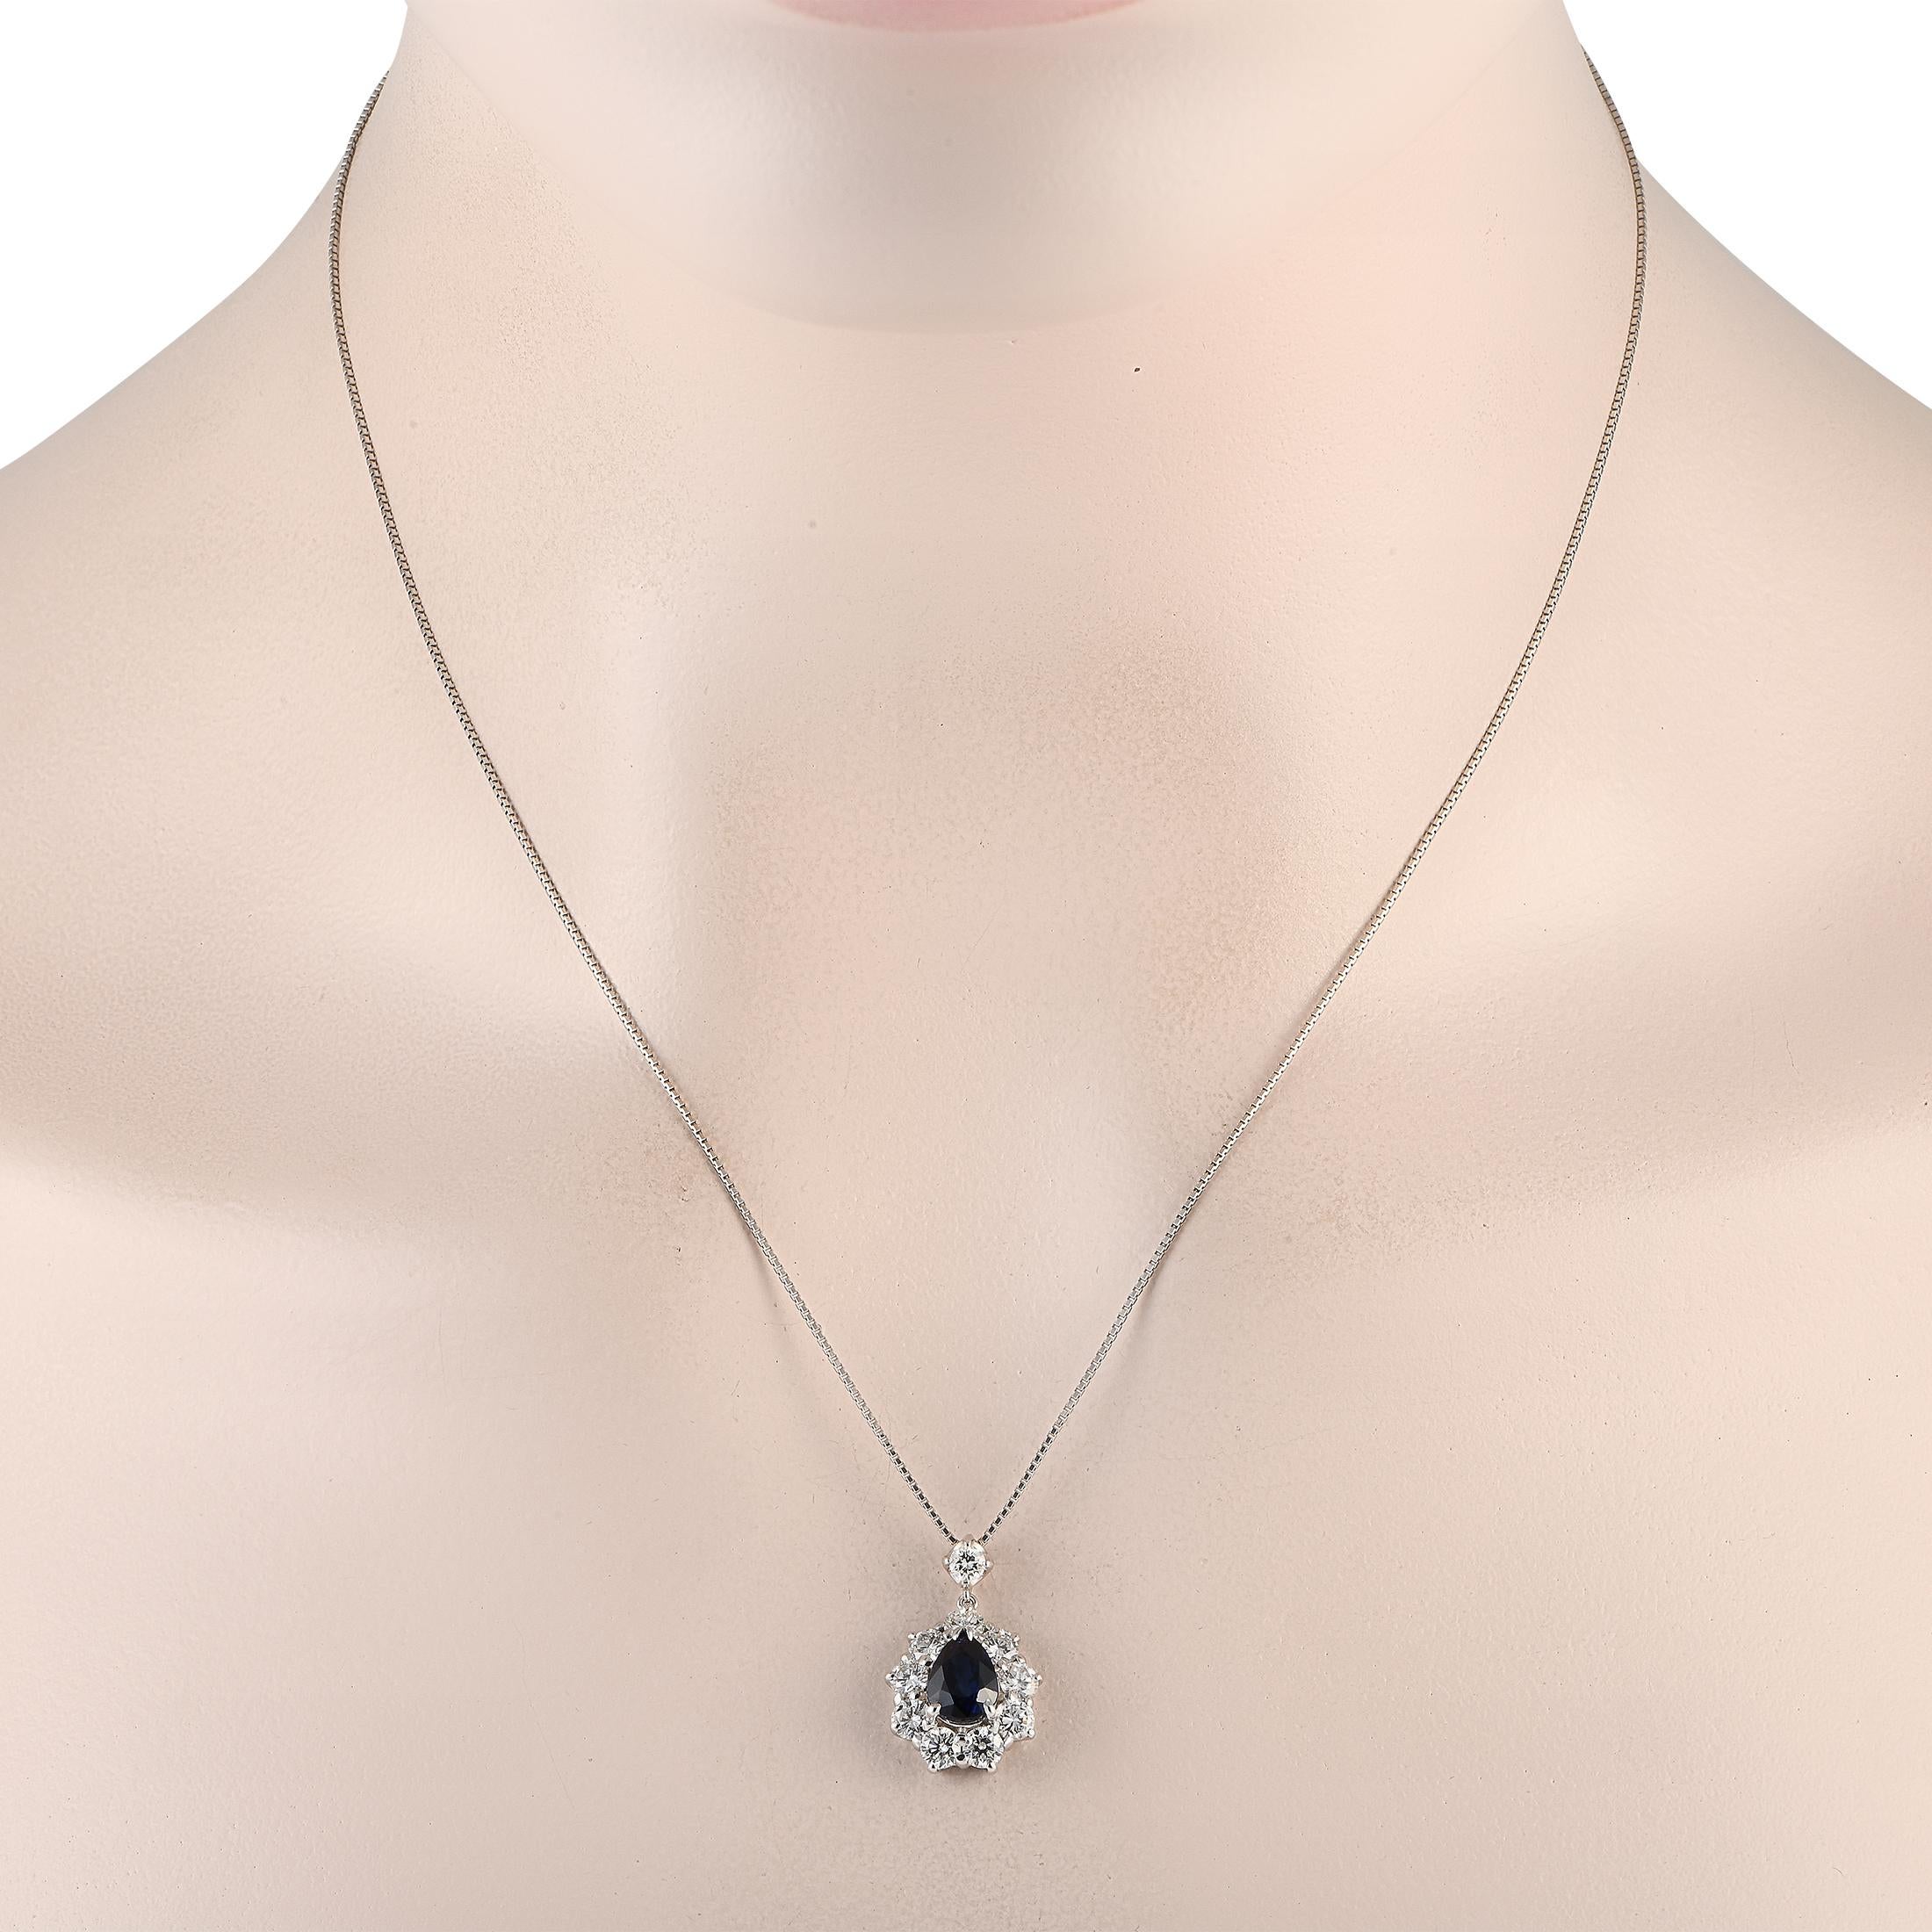 This impressive necklace features a classic design that will never go out of style. Suspended from the sleek 18 box chain is a platinum pendant measuring 0.85 long by 0.50 wide. Diamond accents totaling 1.51 carats provide plenty of sparkle, but its